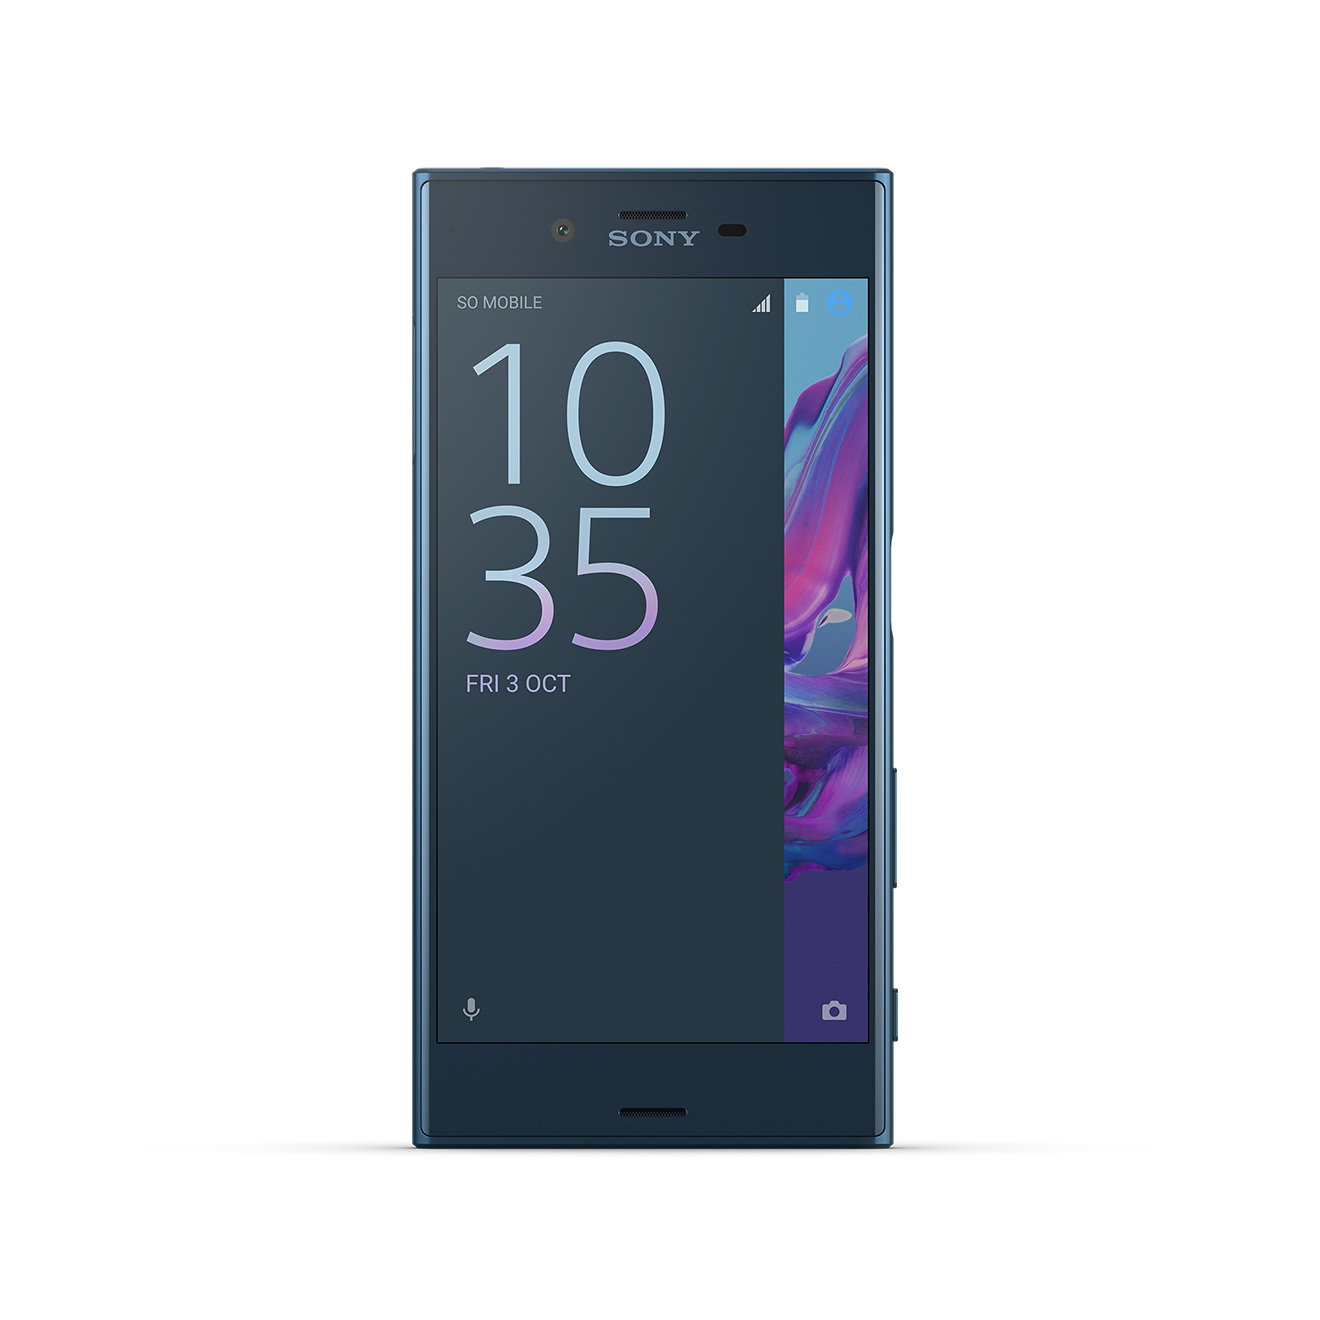 Sony Xperia XZ review - The best Android gaming phone in 2016?